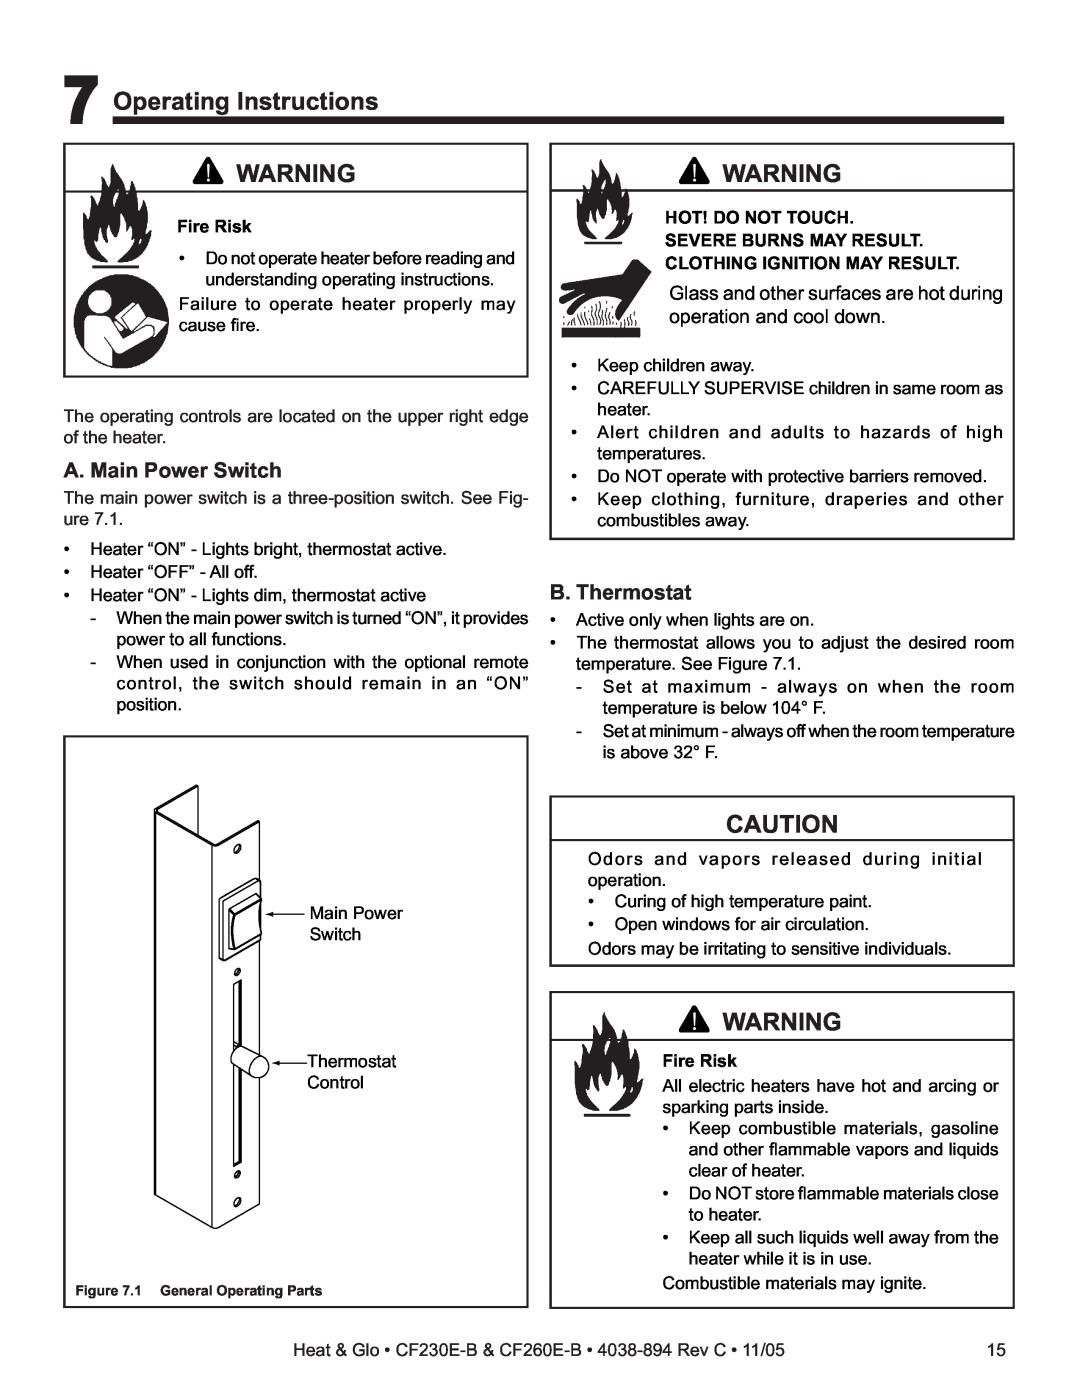 Heat & Glo LifeStyle CF260E-B Operating Instructions, A. Main Power Switch, B. Thermostat, operation and cool down 